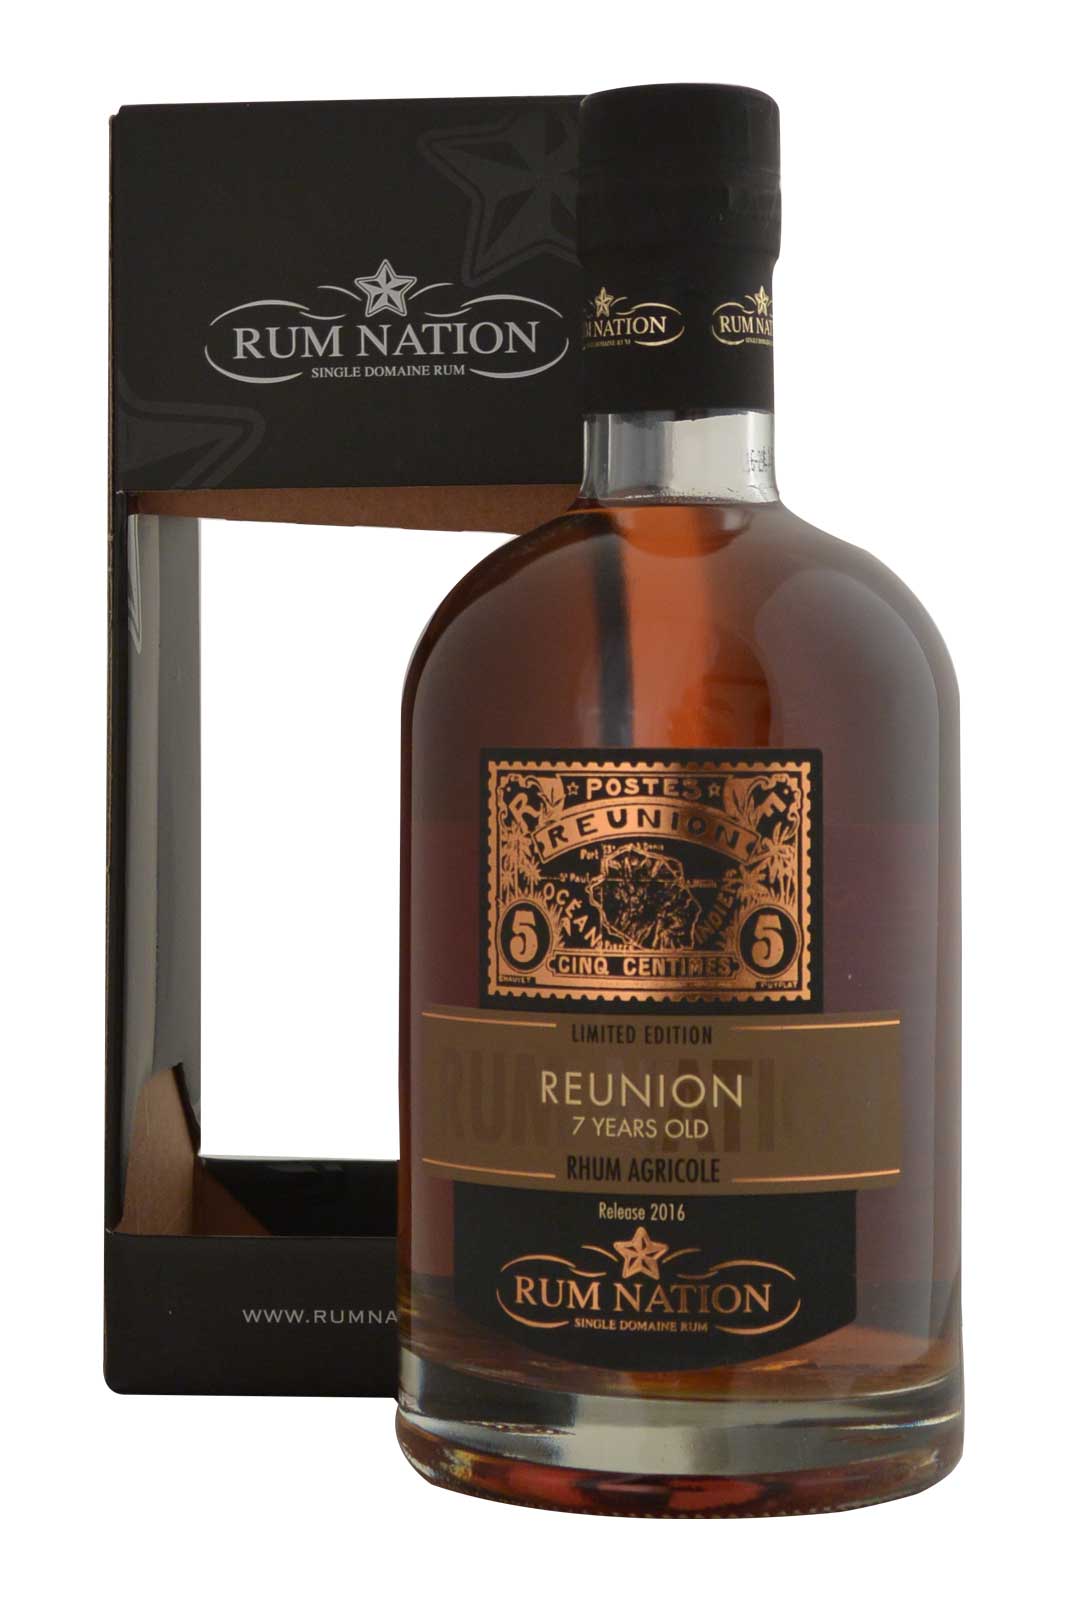 Rum Nation Reunion 7 Year Old